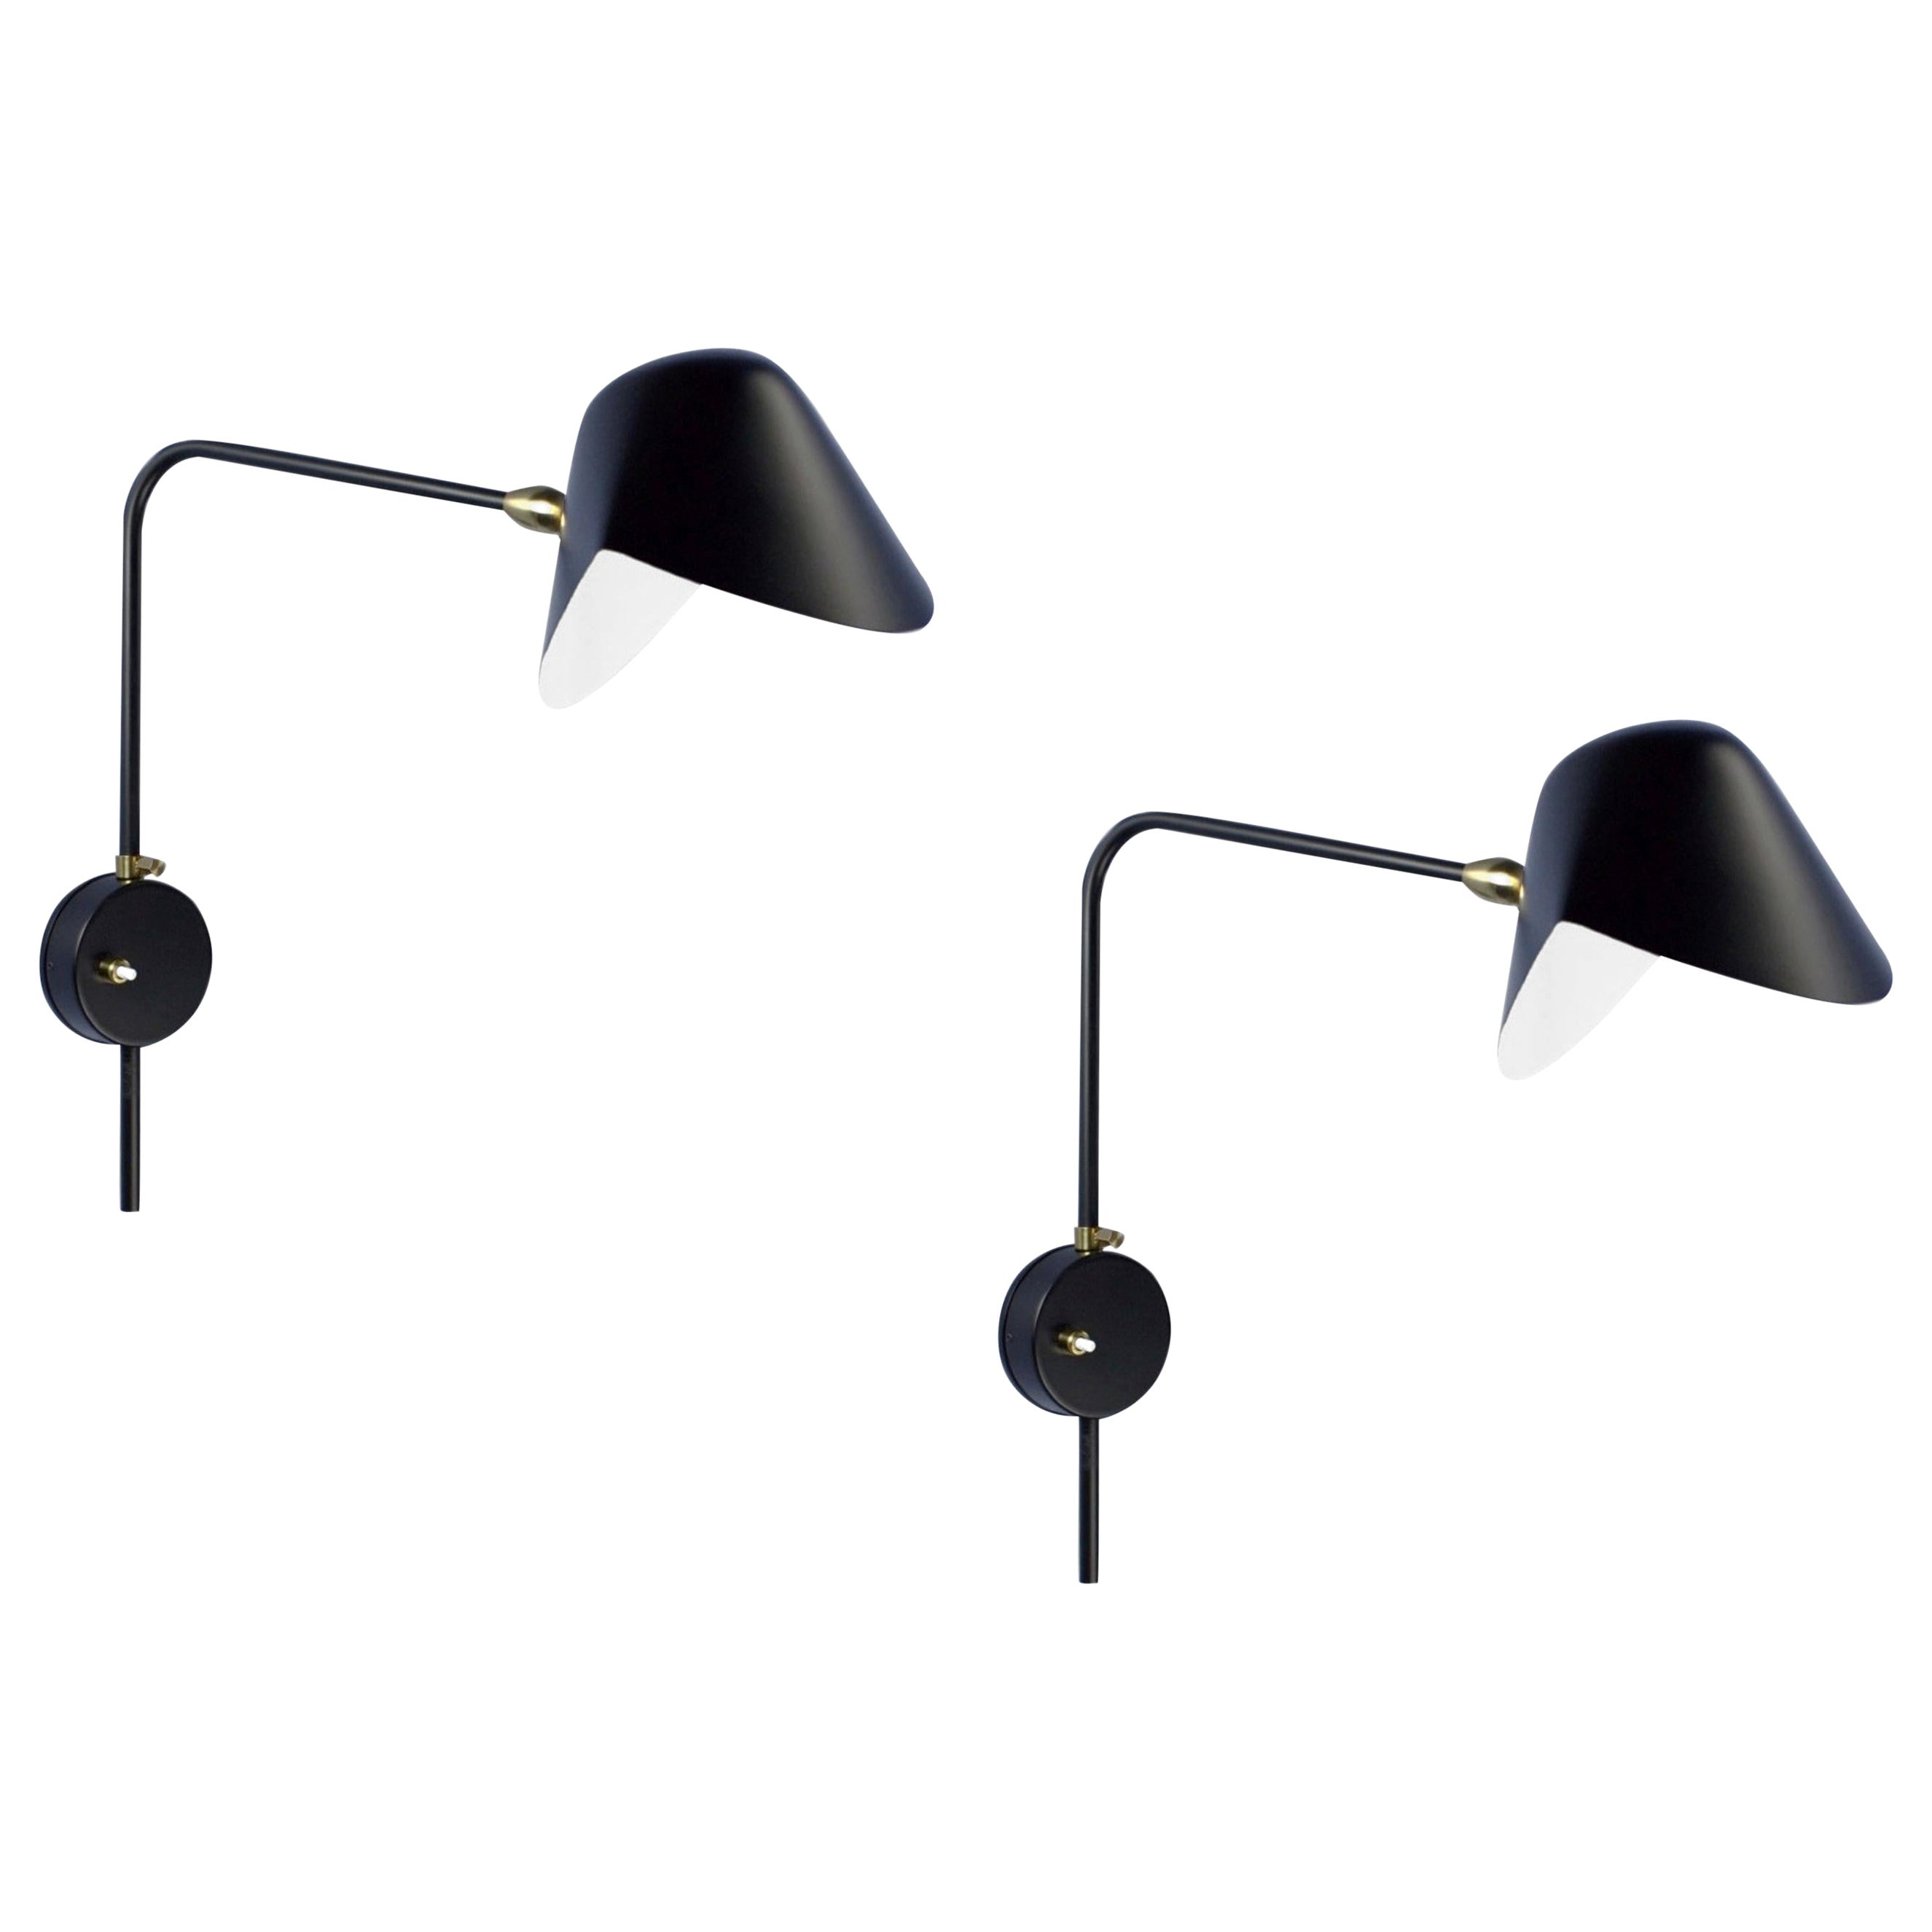 Serge Mouille Modern Black Anthony Wall Lamp Whit Round Fixation Box Set For Sale